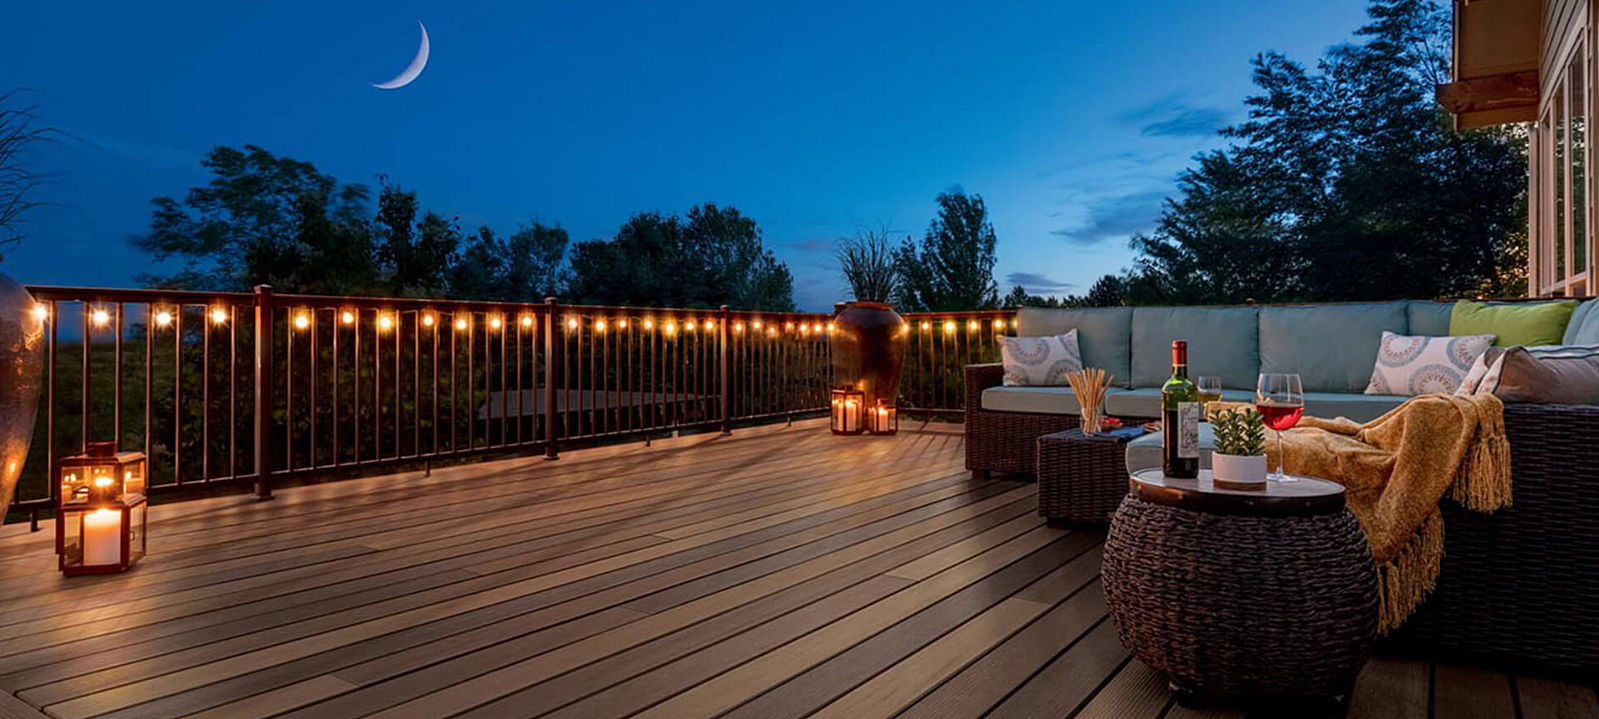 What Are the Different Types of Timber Decking?